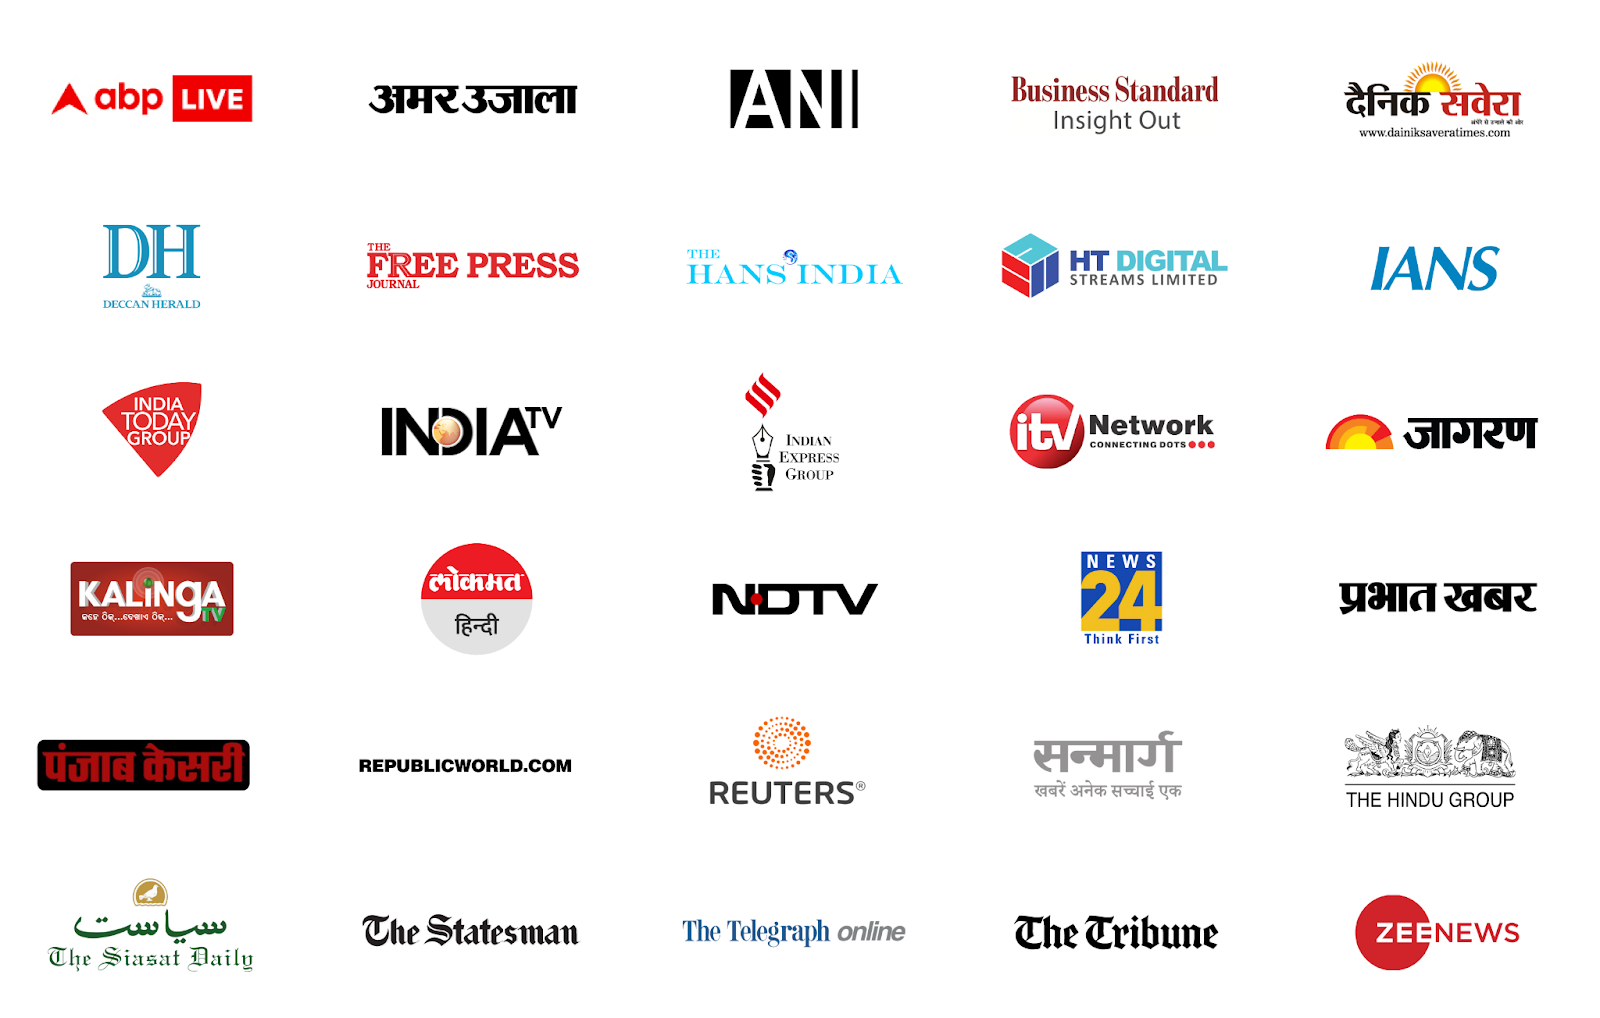 Our current Indian news partners for Google News Showcase